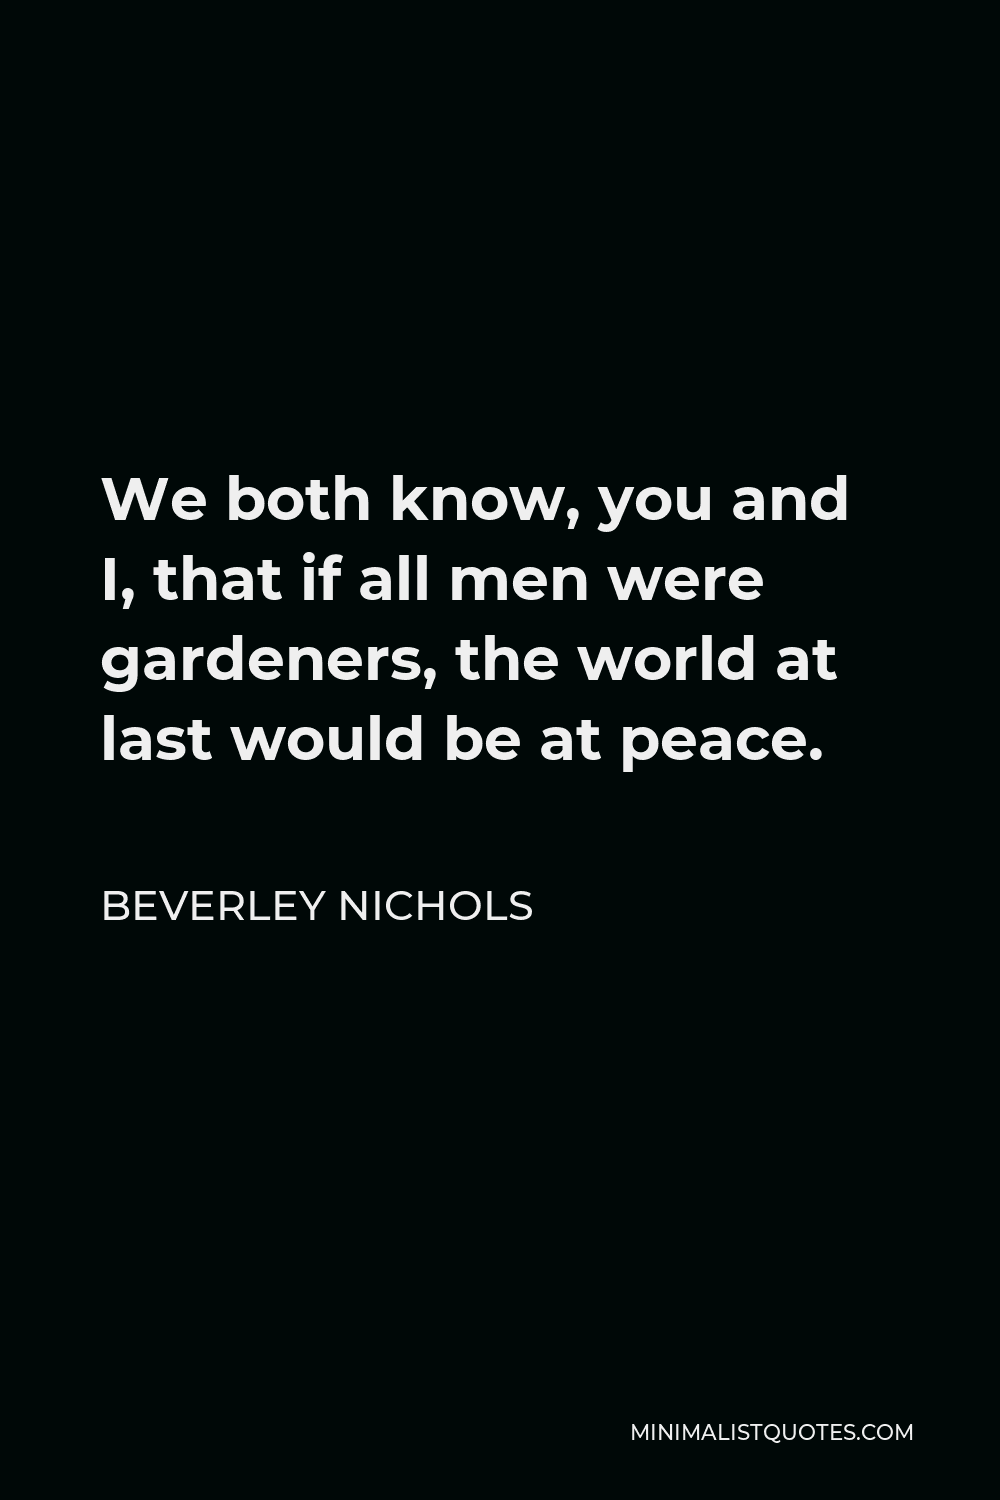 Beverley Nichols Quote - We both know, you and I, that if all men were gardeners, the world at last would be at peace.